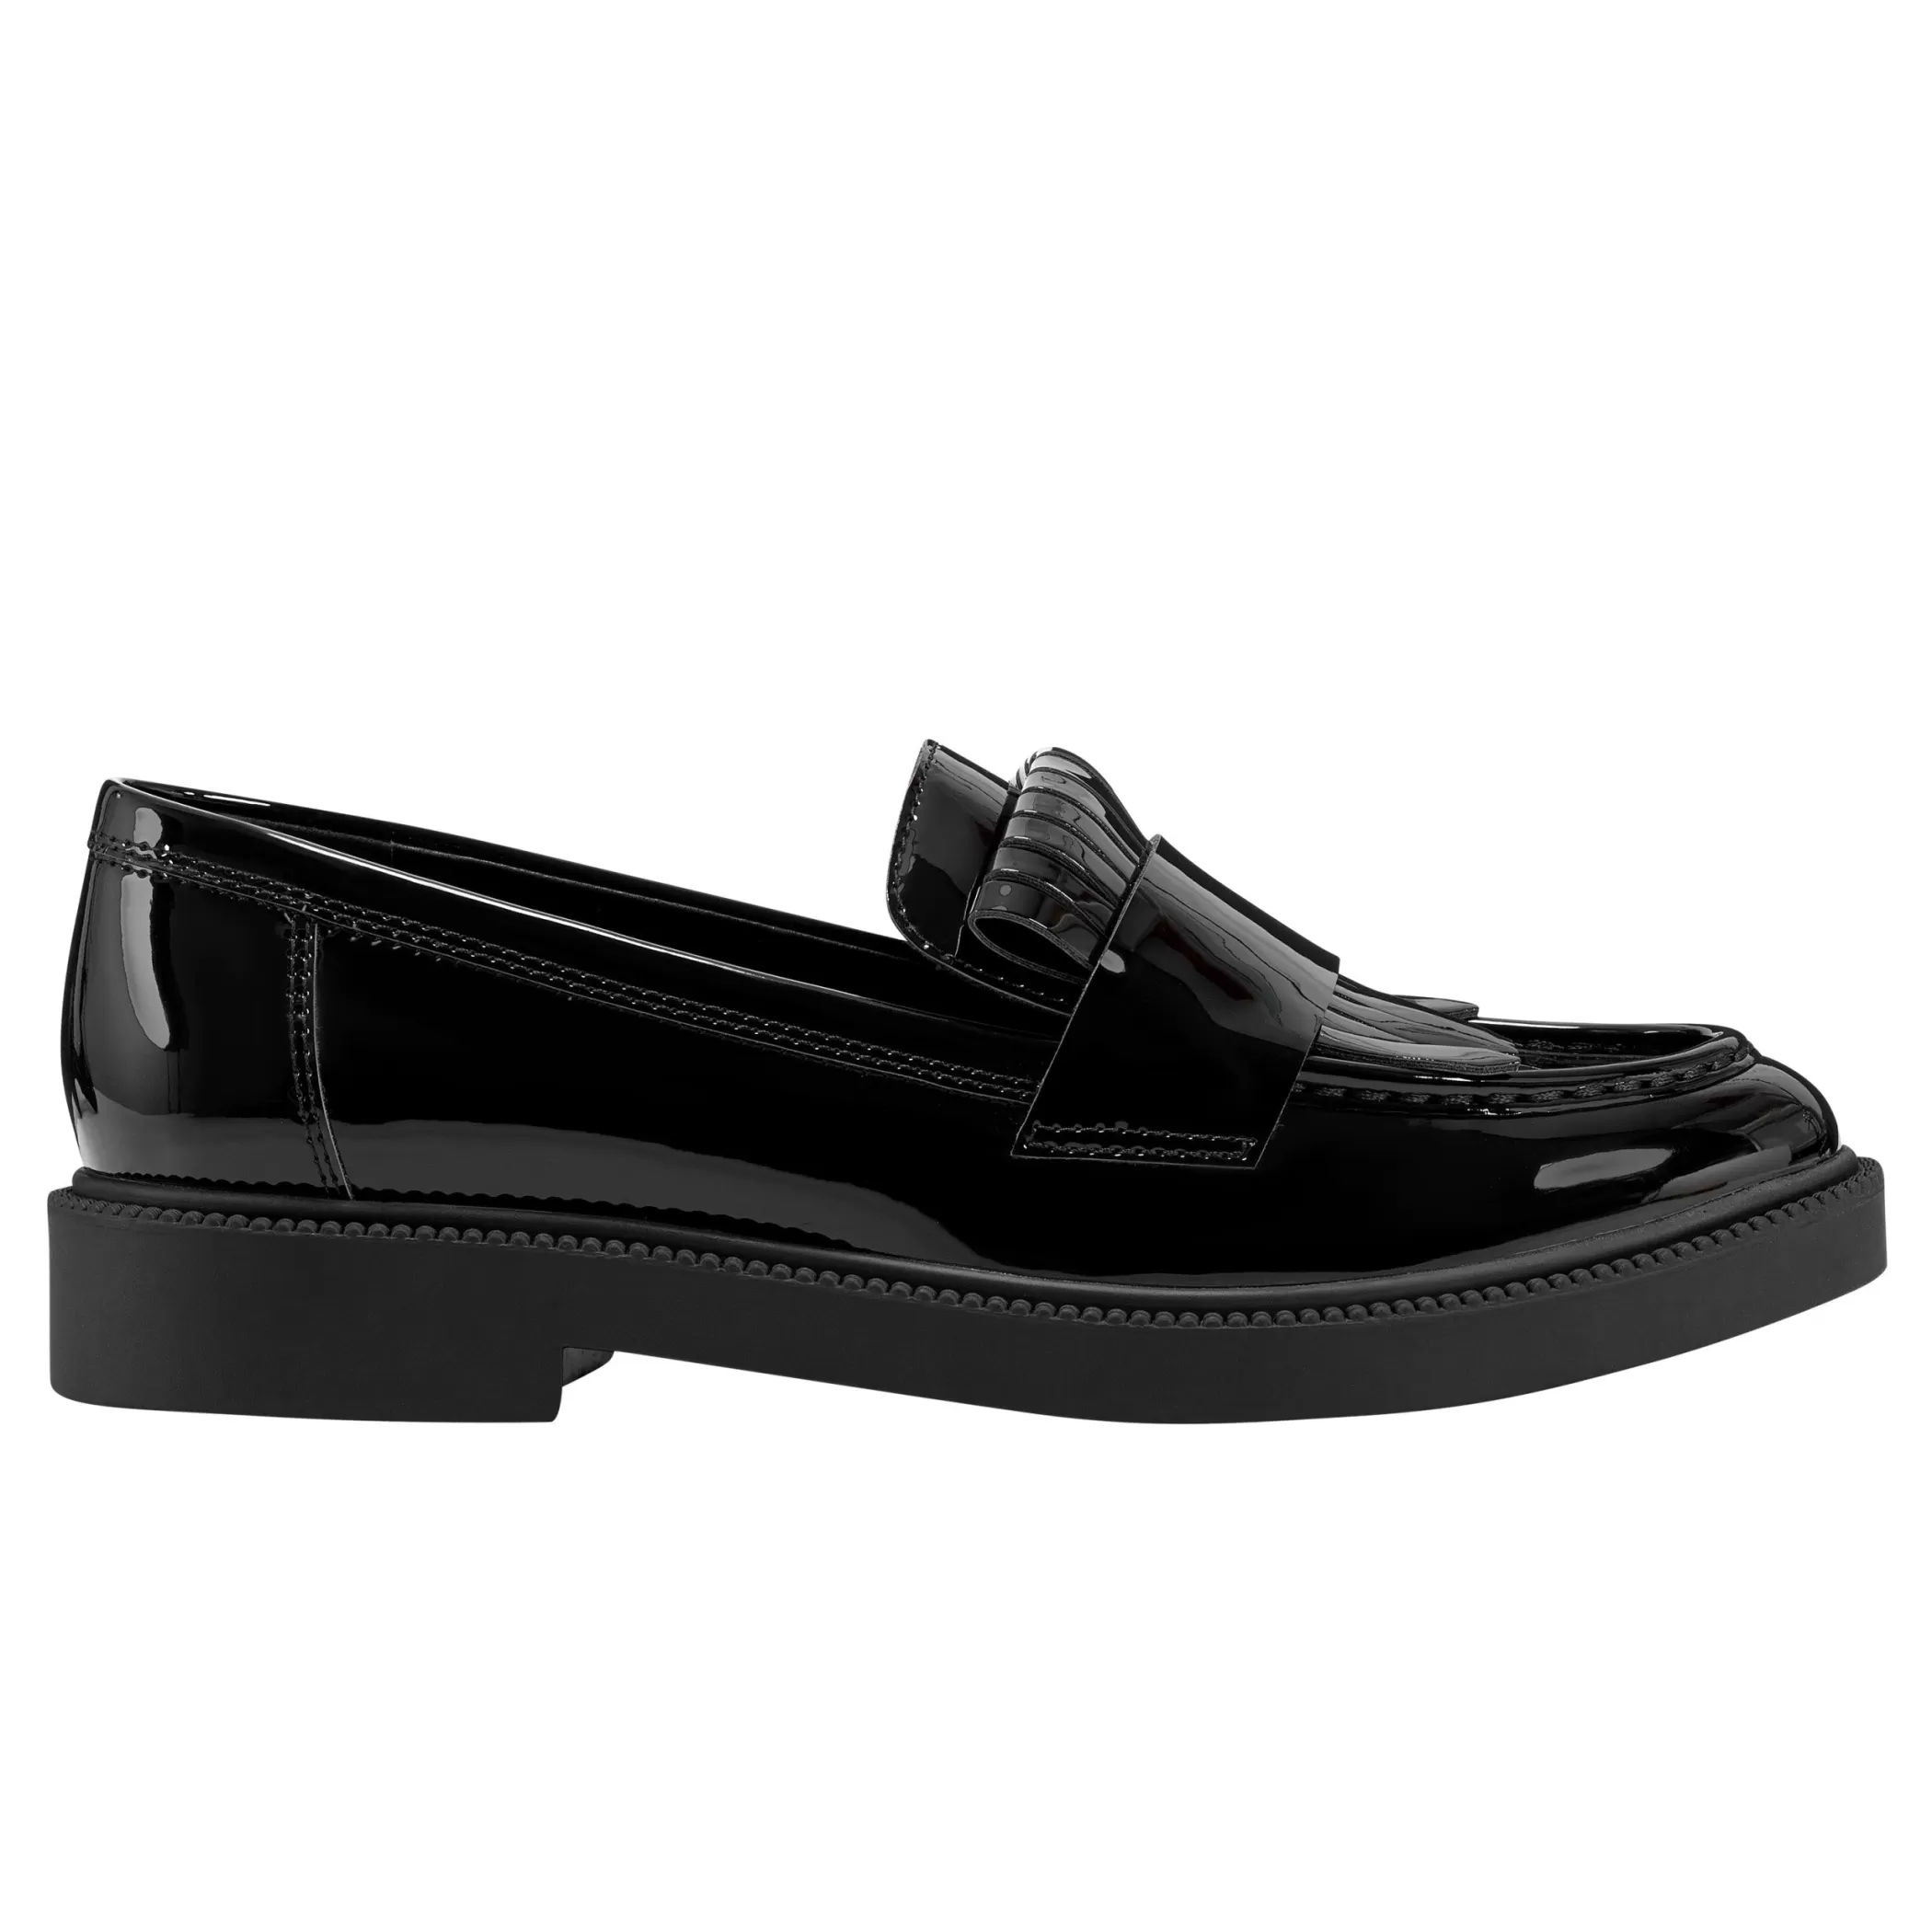 Store Marc Fisher Calixy Loafer Black